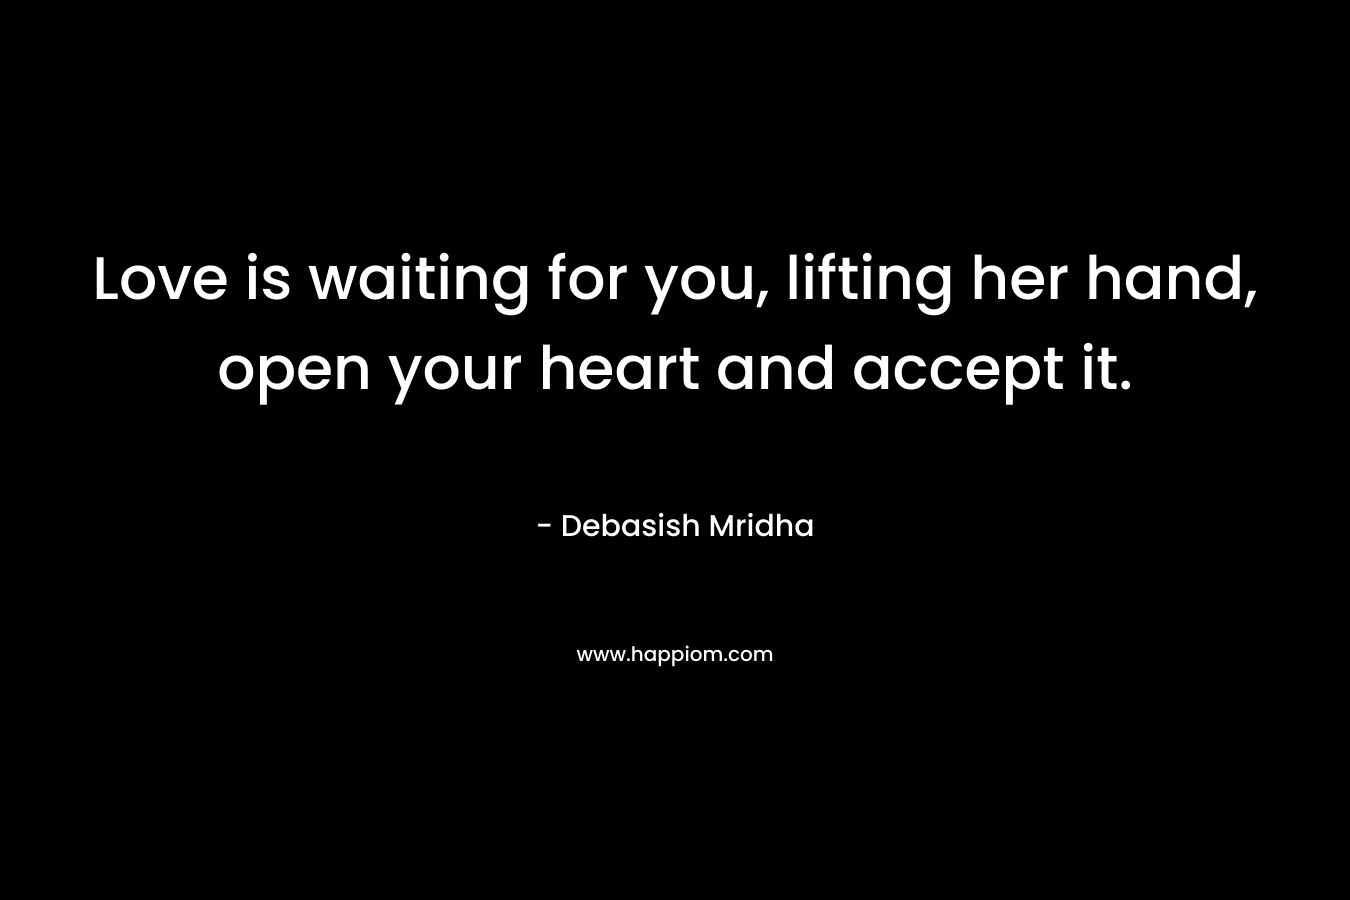 Love is waiting for you, lifting her hand, open your heart and accept it.